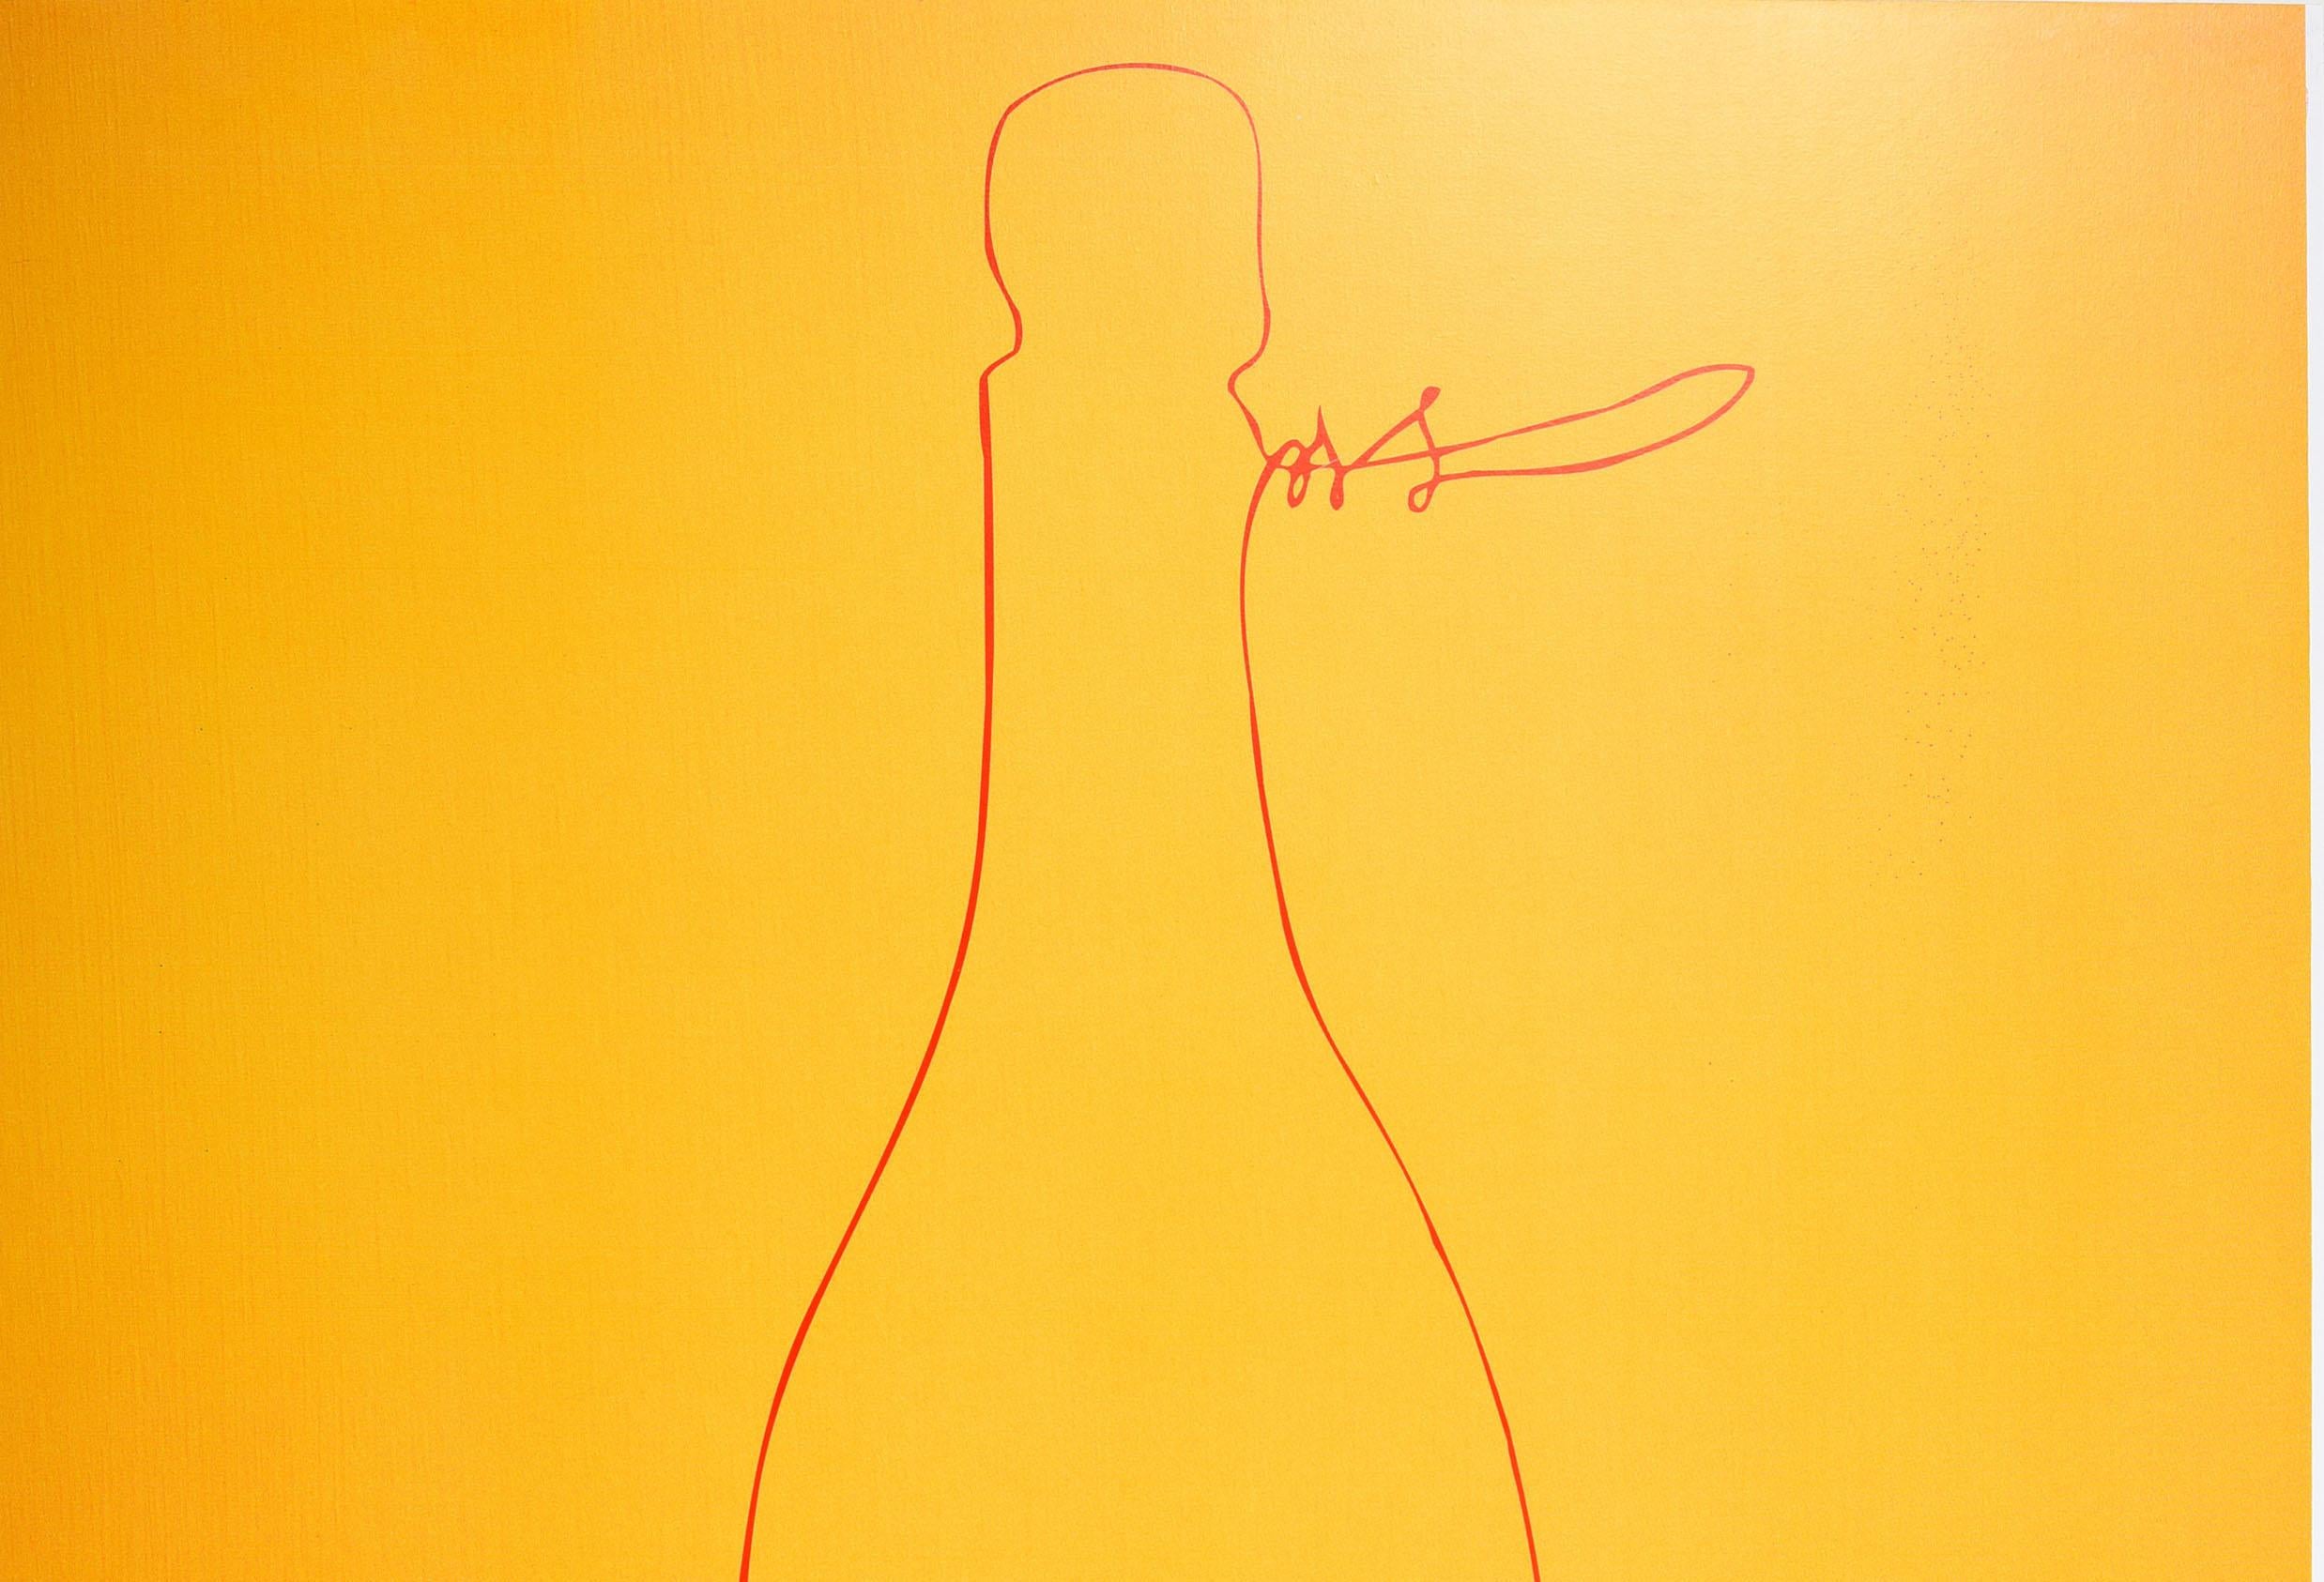 Original vintage drink advertising poster for Veuve Clicquot Ponsardin champagne featuring the outline of a bottle from the label against the champagne house's iconic yellow background with the website address below. Located in Reims France, Veuve